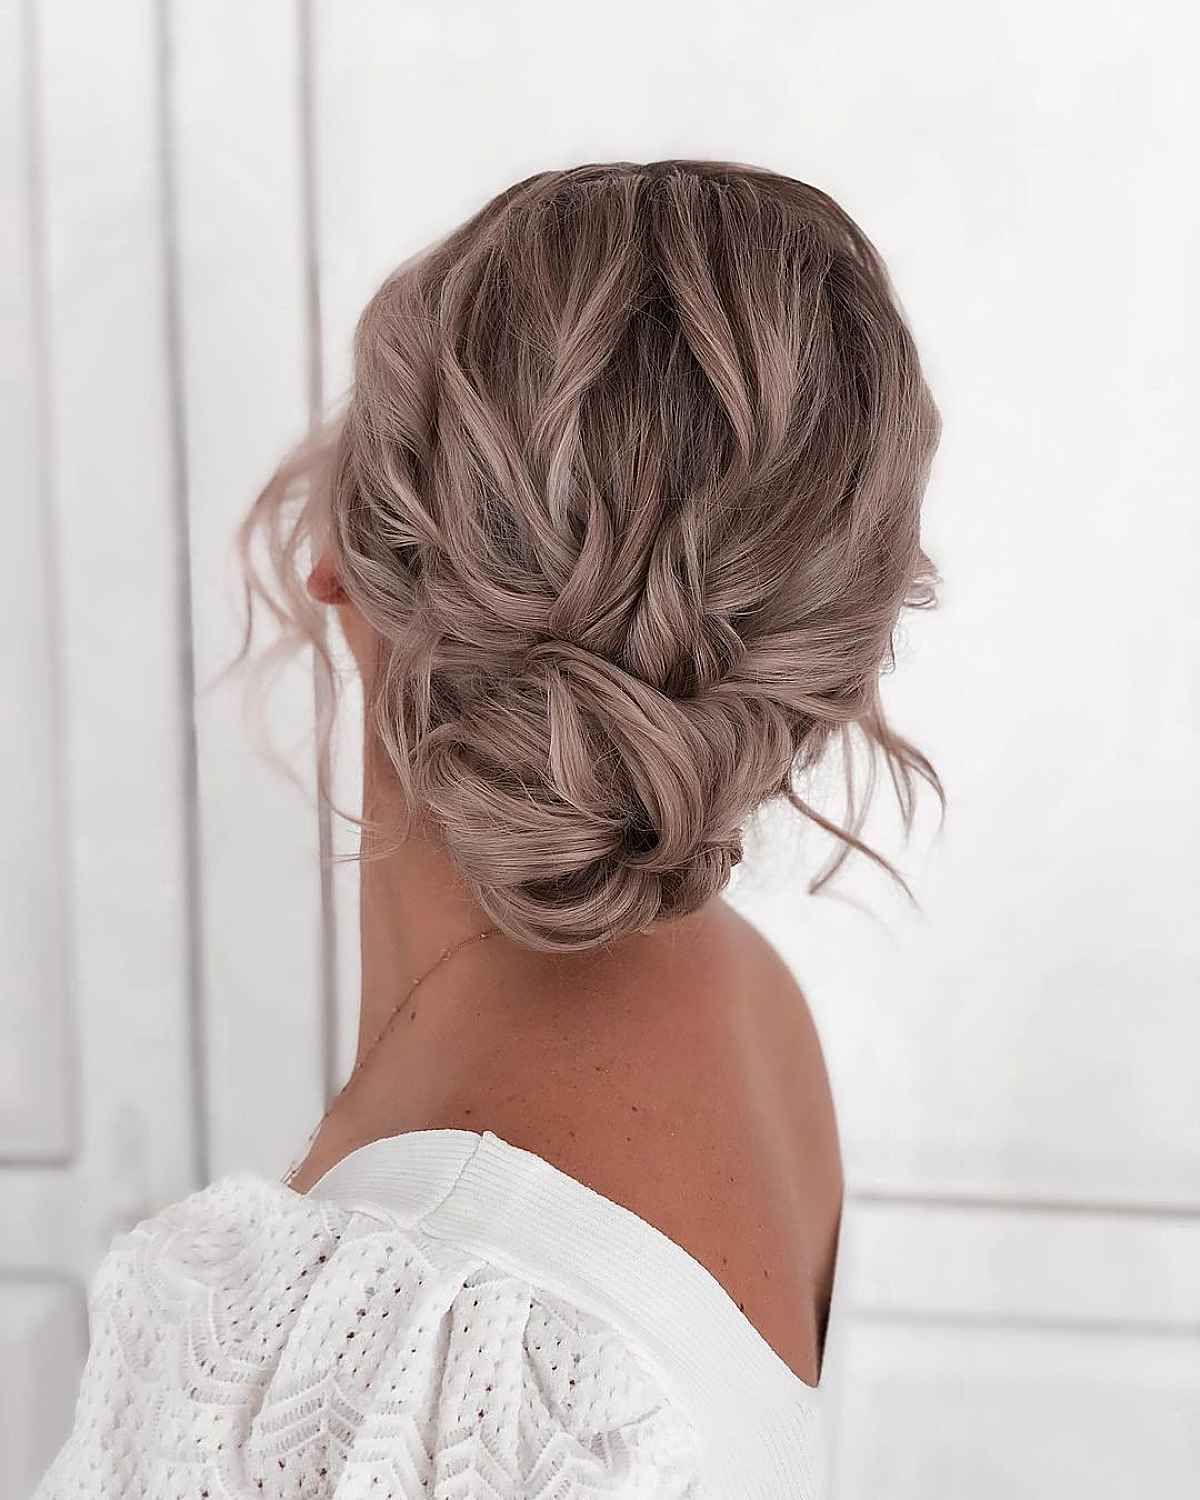 Most Recent Low Formal Bun Updo Inside 20 Romantic Bun Hairstyles For Prom That Are Easy To Do (View 14 of 15)